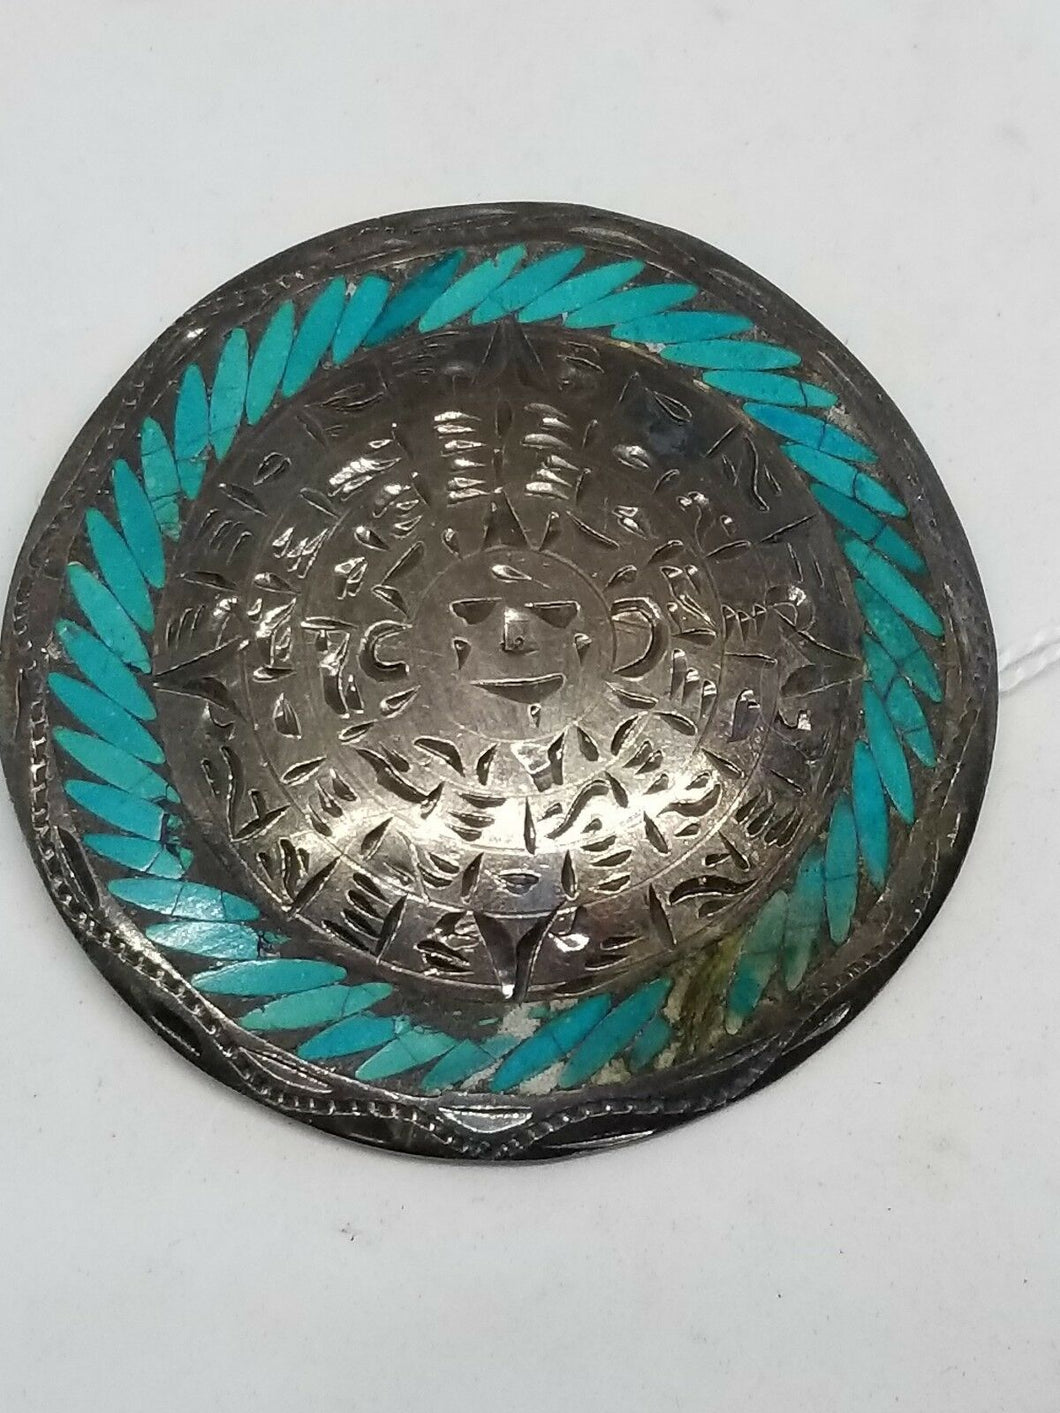 Vintage Sterling Silver Aztec Mexican Turquoise Inlay Etched Pendant Brooch